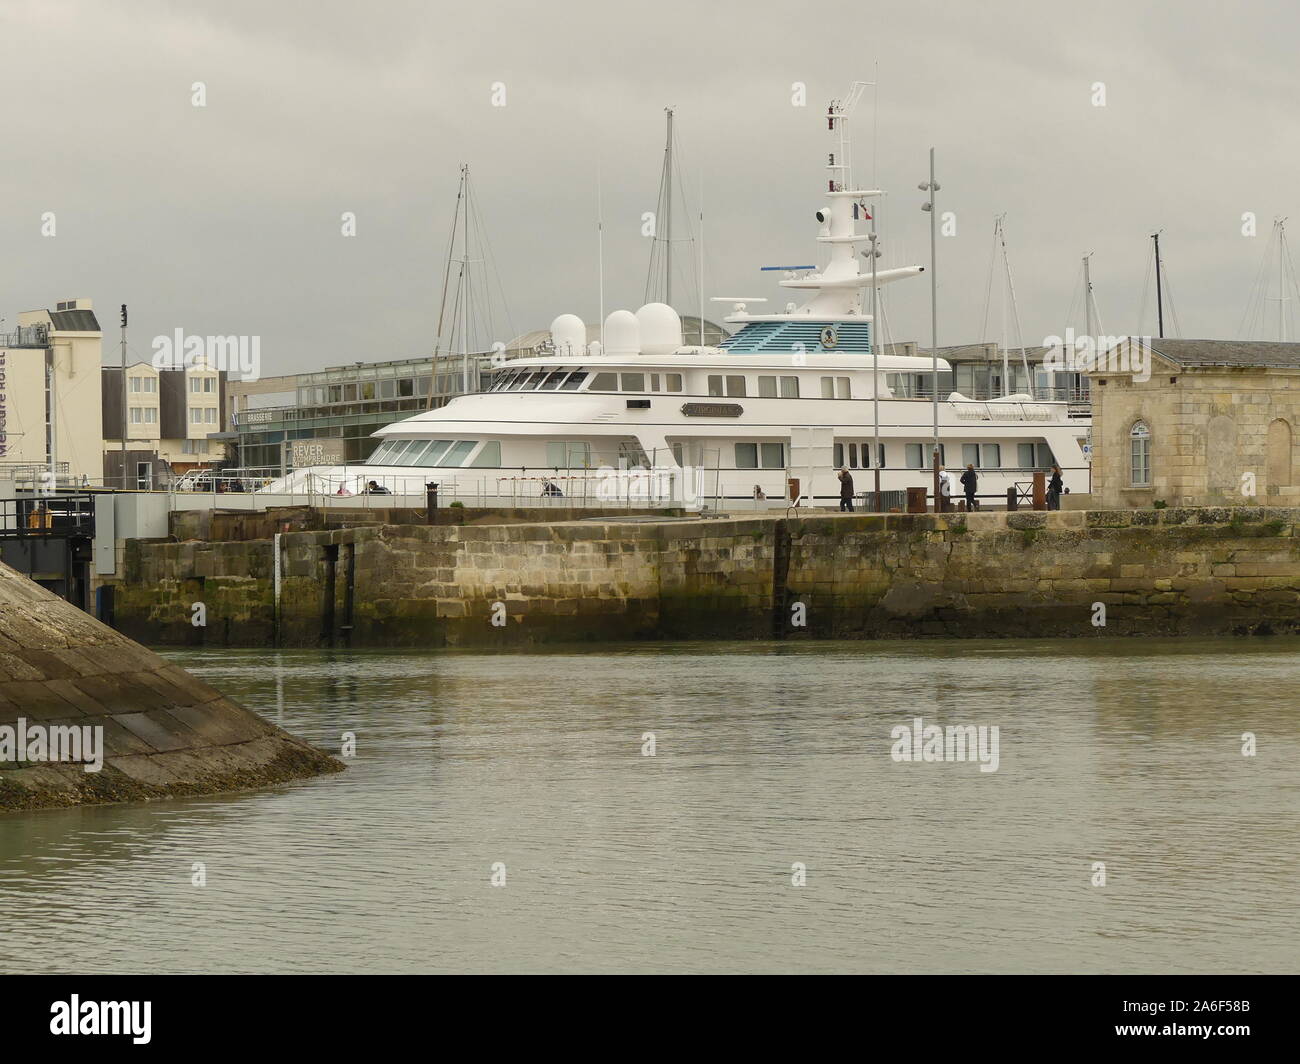 The Yatch Virginian is arrived to La Rochelle, october 21, 2019, to undergo a complete renovation of 6 months by Atlantic Refit Center of La Pallice Stock Photo